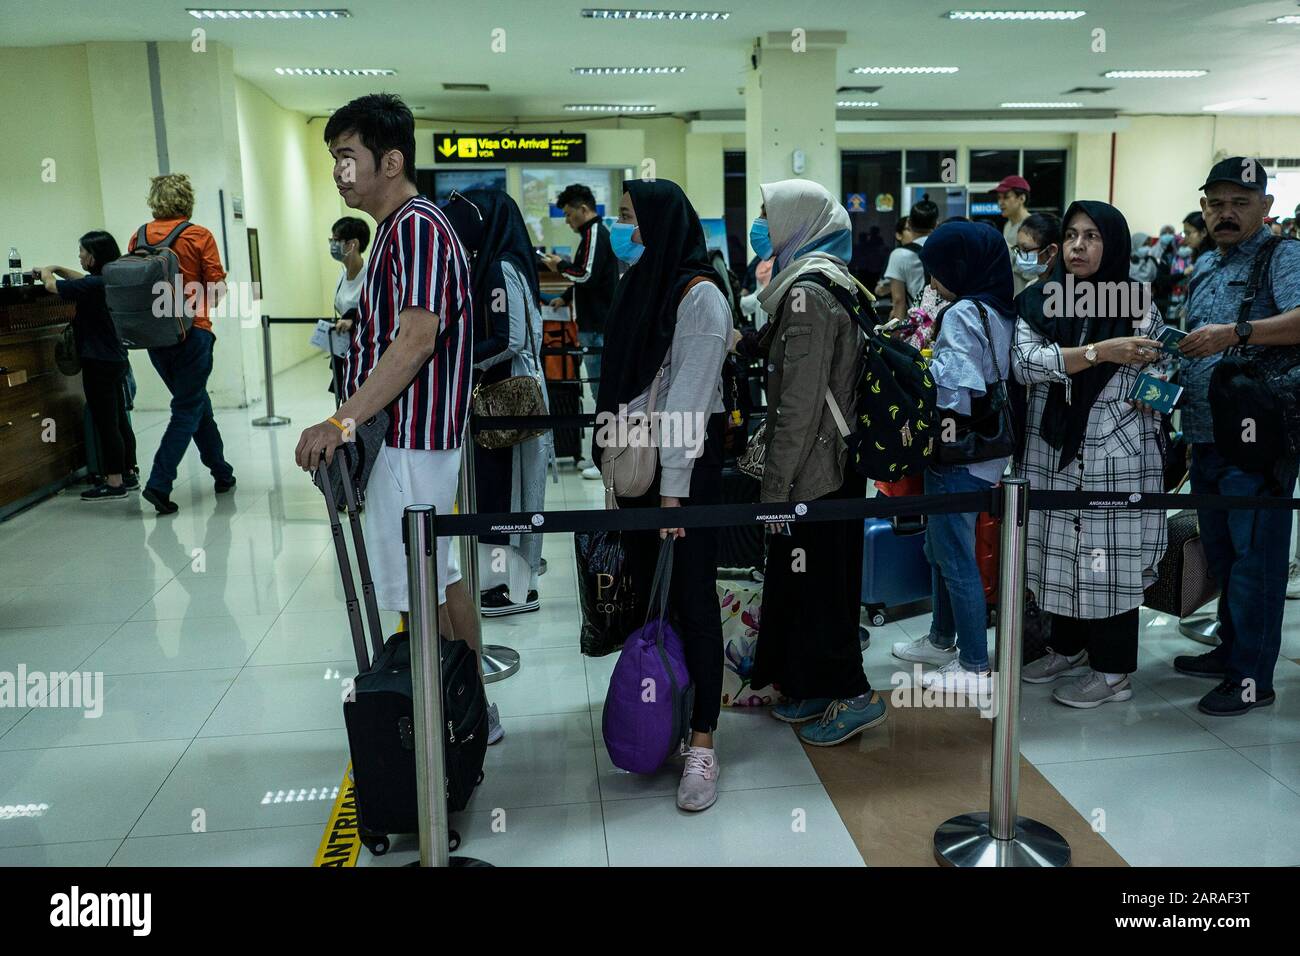 Passengers wear masks on the arrival at the Sultan Iskandar Muda International Airport in Aceh Besar Regency.Indonesian government announced it was officially stopping flights to Wuhan China, a deadly new virus center, and health checks at airports in Indonesia were tightened. Stock Photo